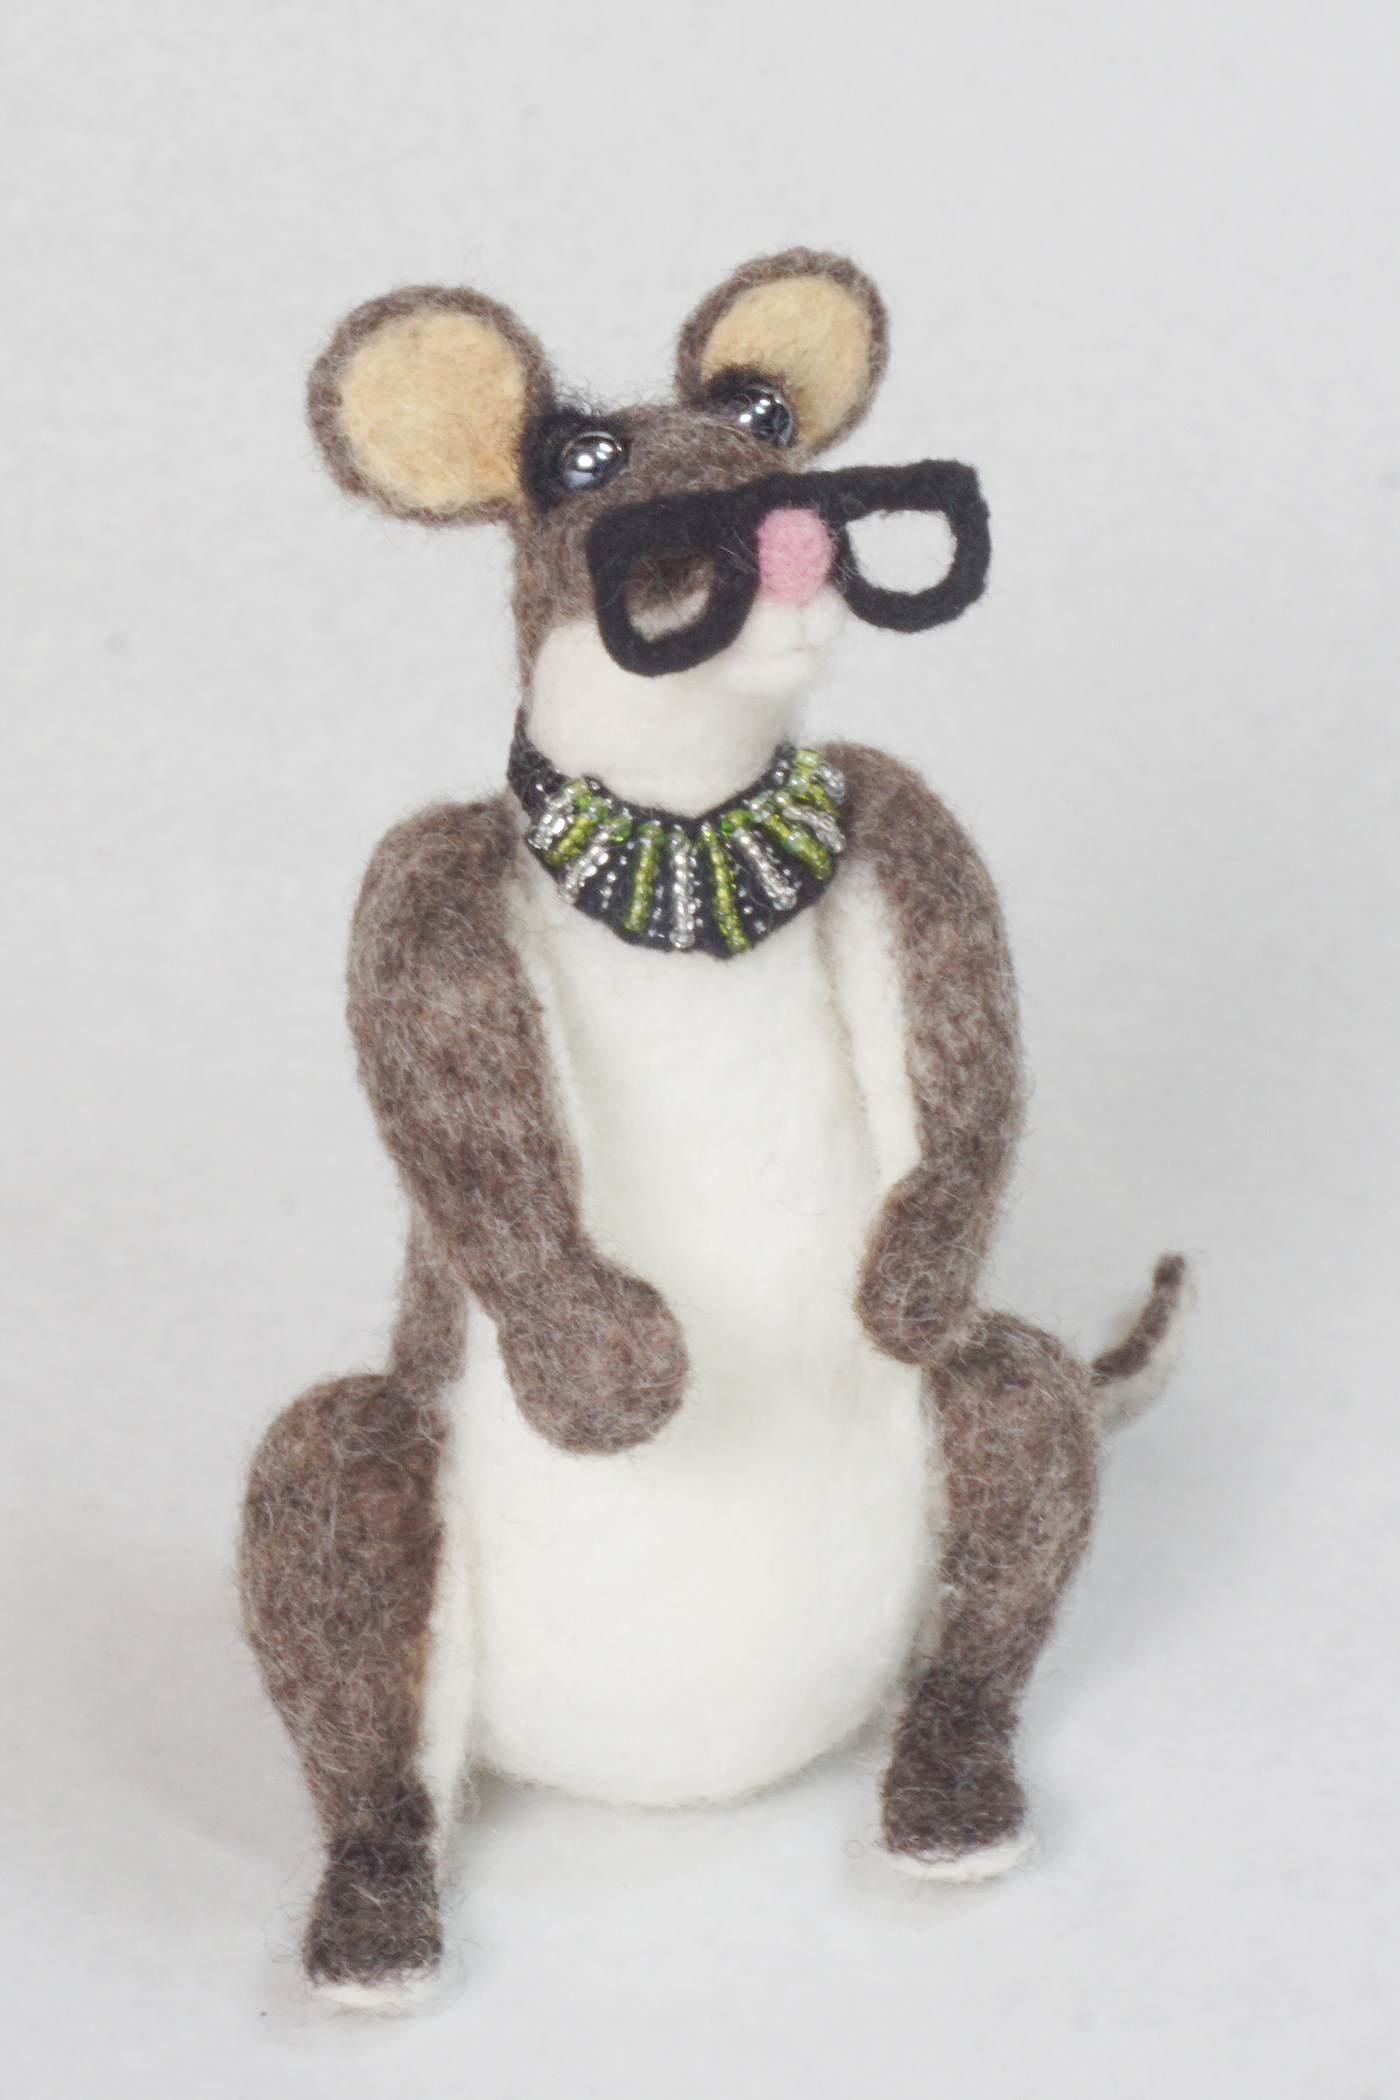 sculpture of an anthropomorphic mouse RBG,